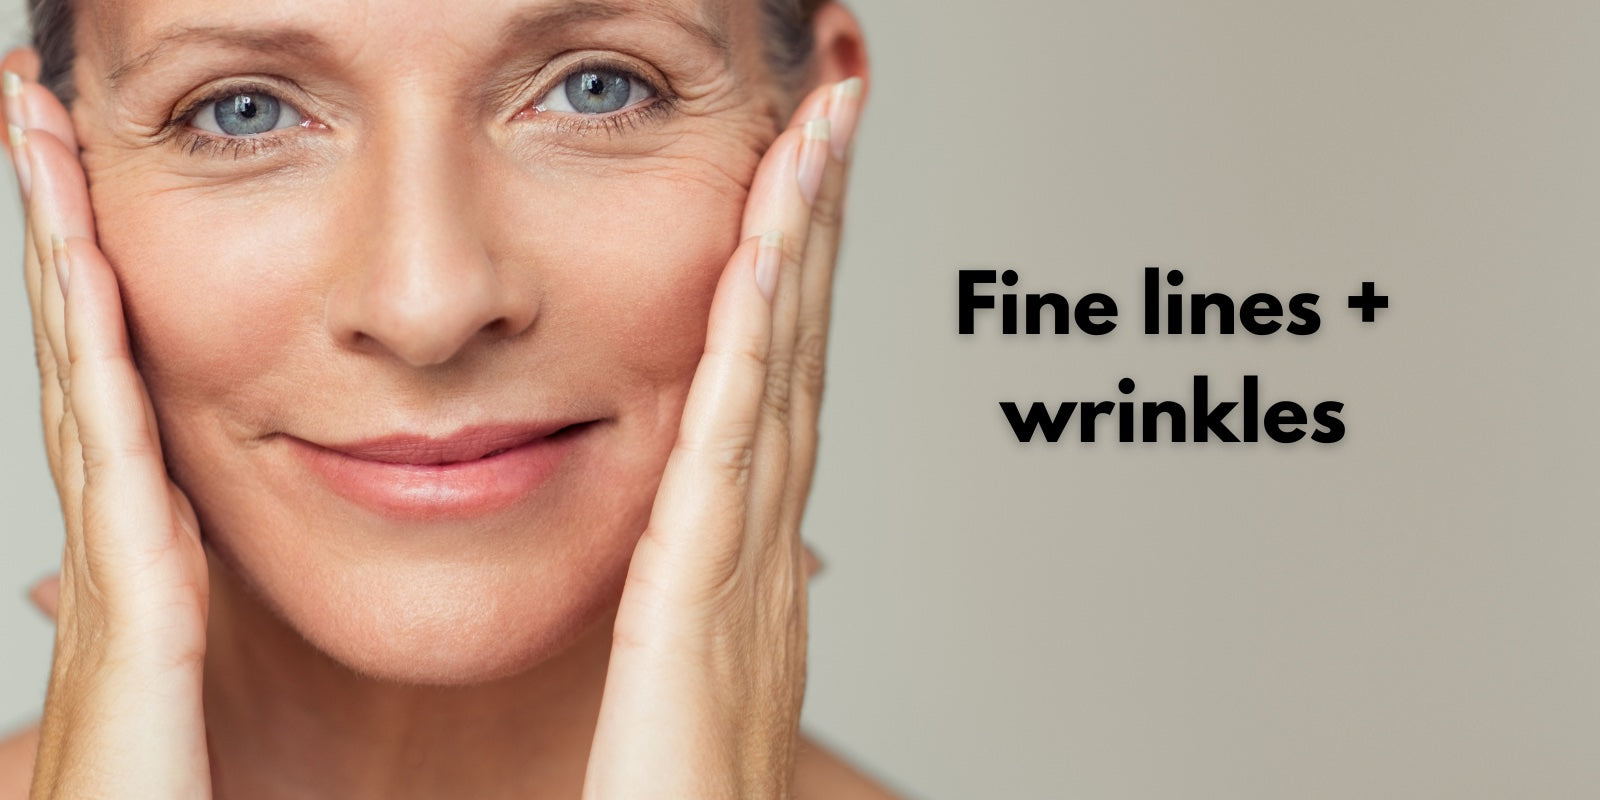 menopause and fine lines and wrinkles. How menopause may affect your skin